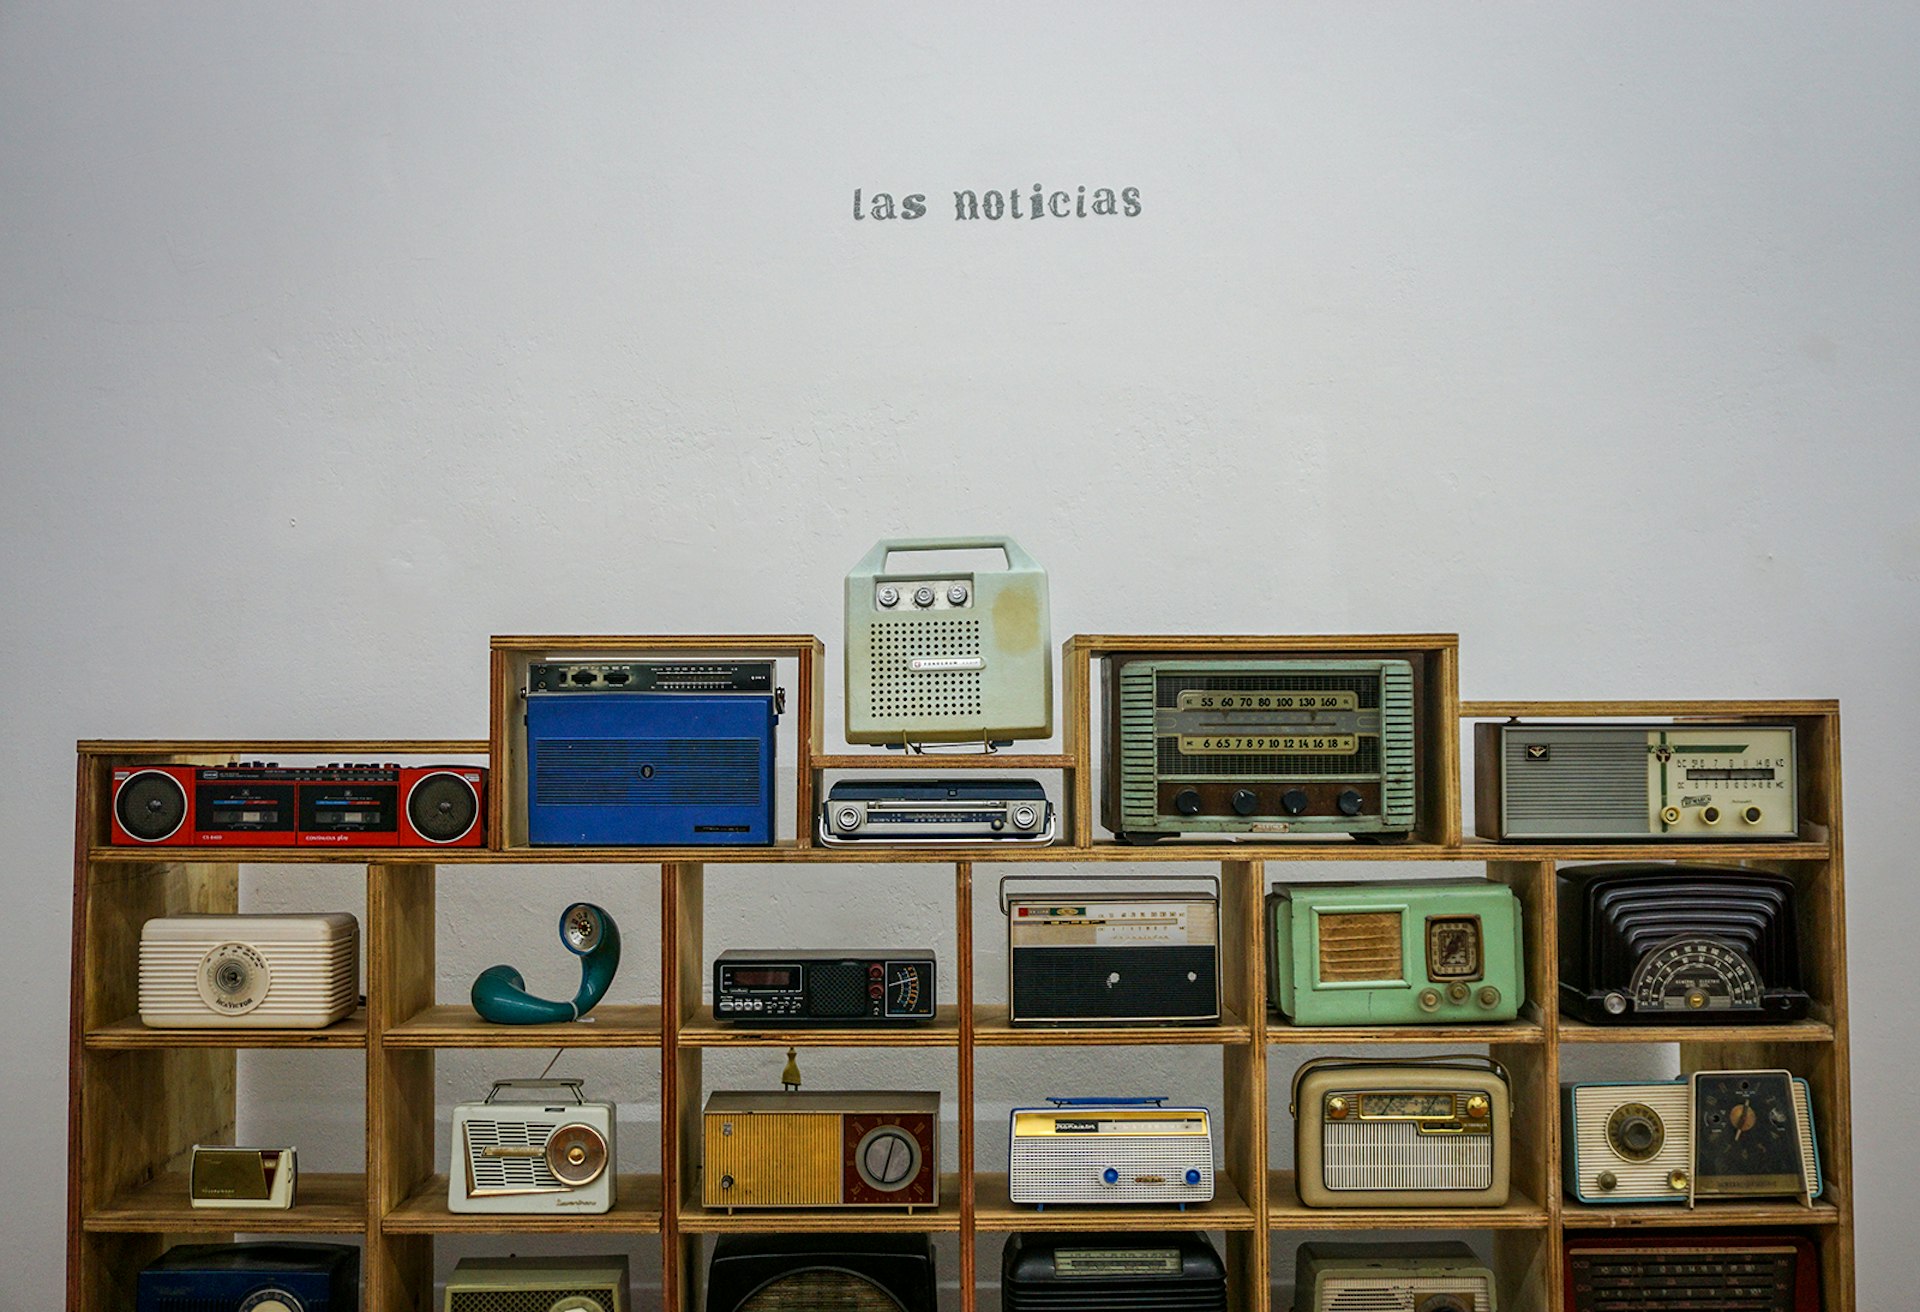 Old radios stacked in a mid-century style shelf against a blank white wall, with "las noticias" printed on the wall above them